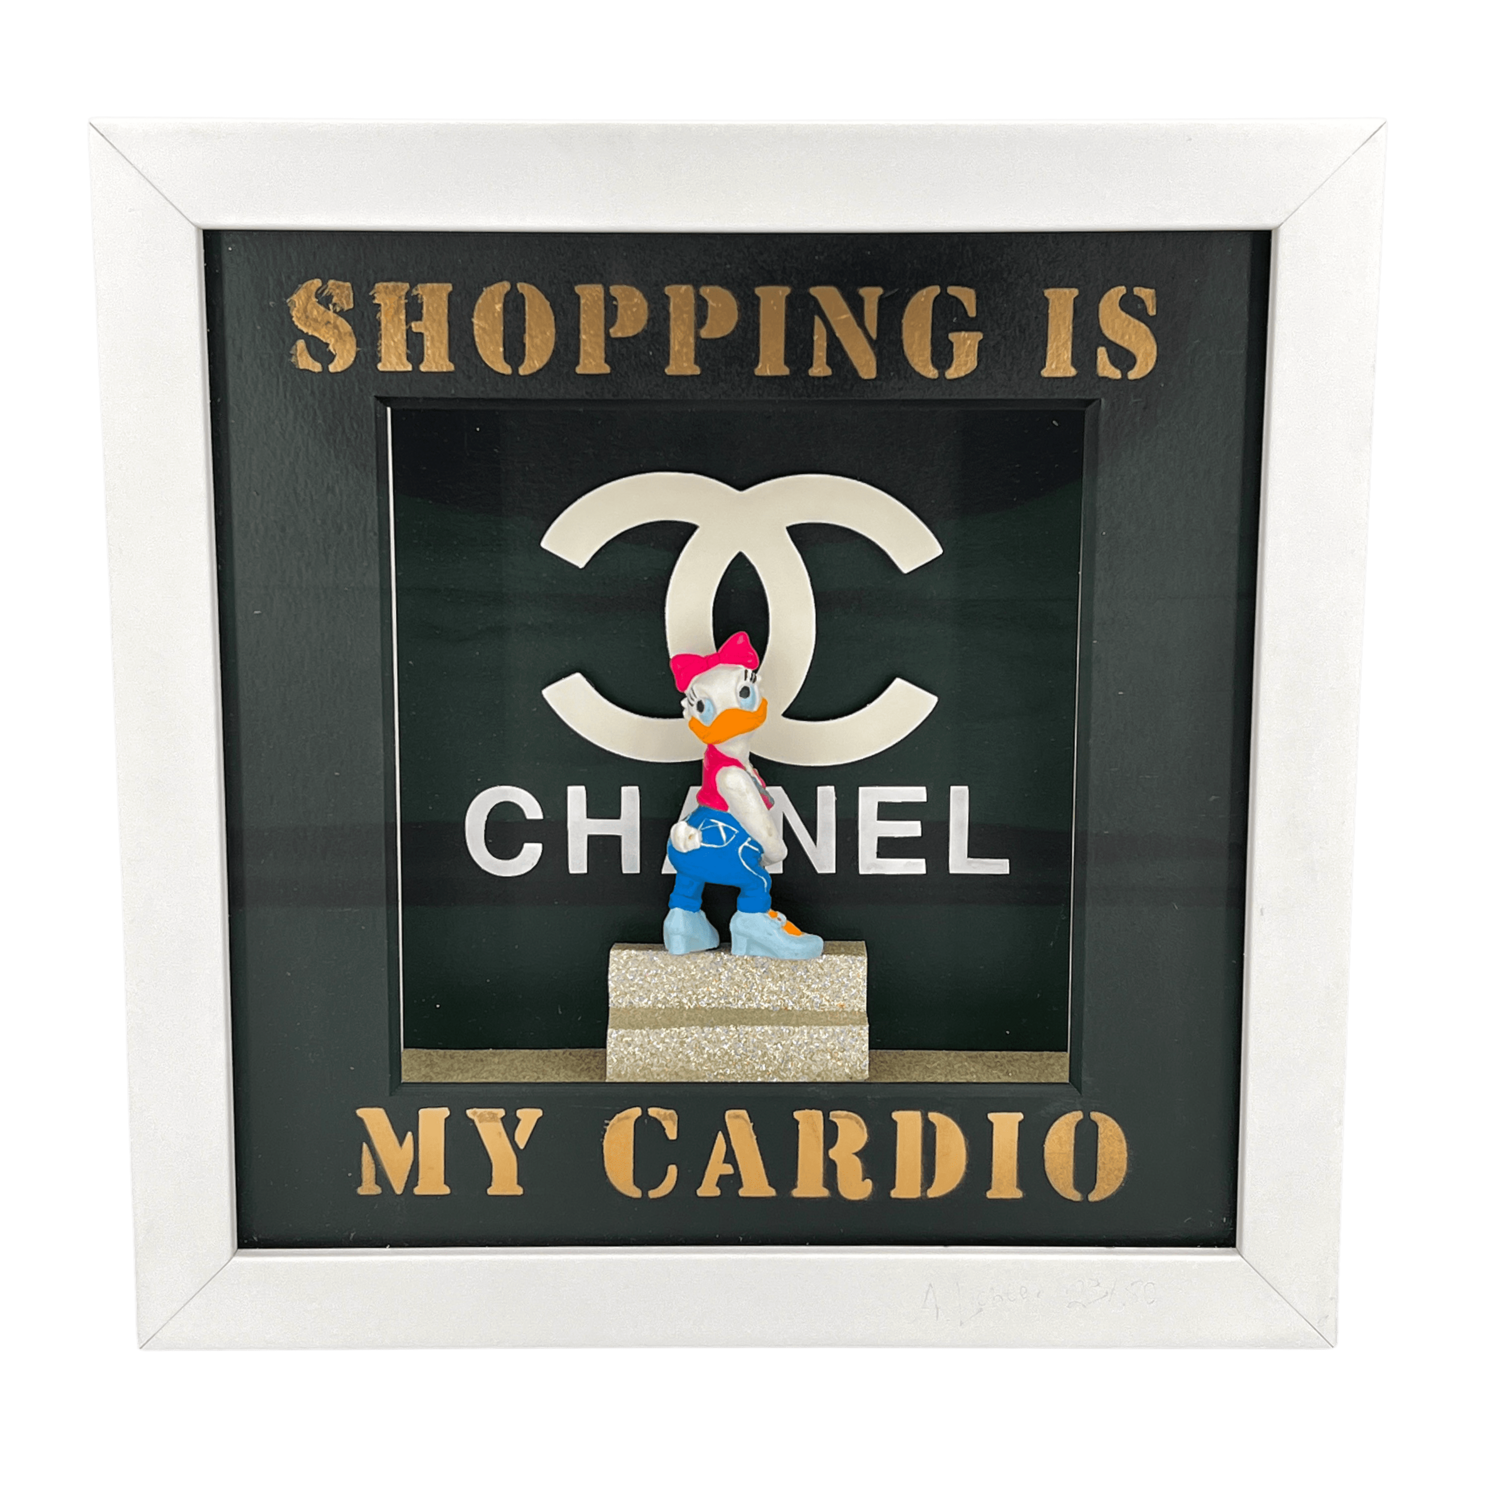 Andreas Lichter "Shopping is my Cardio" Daisy